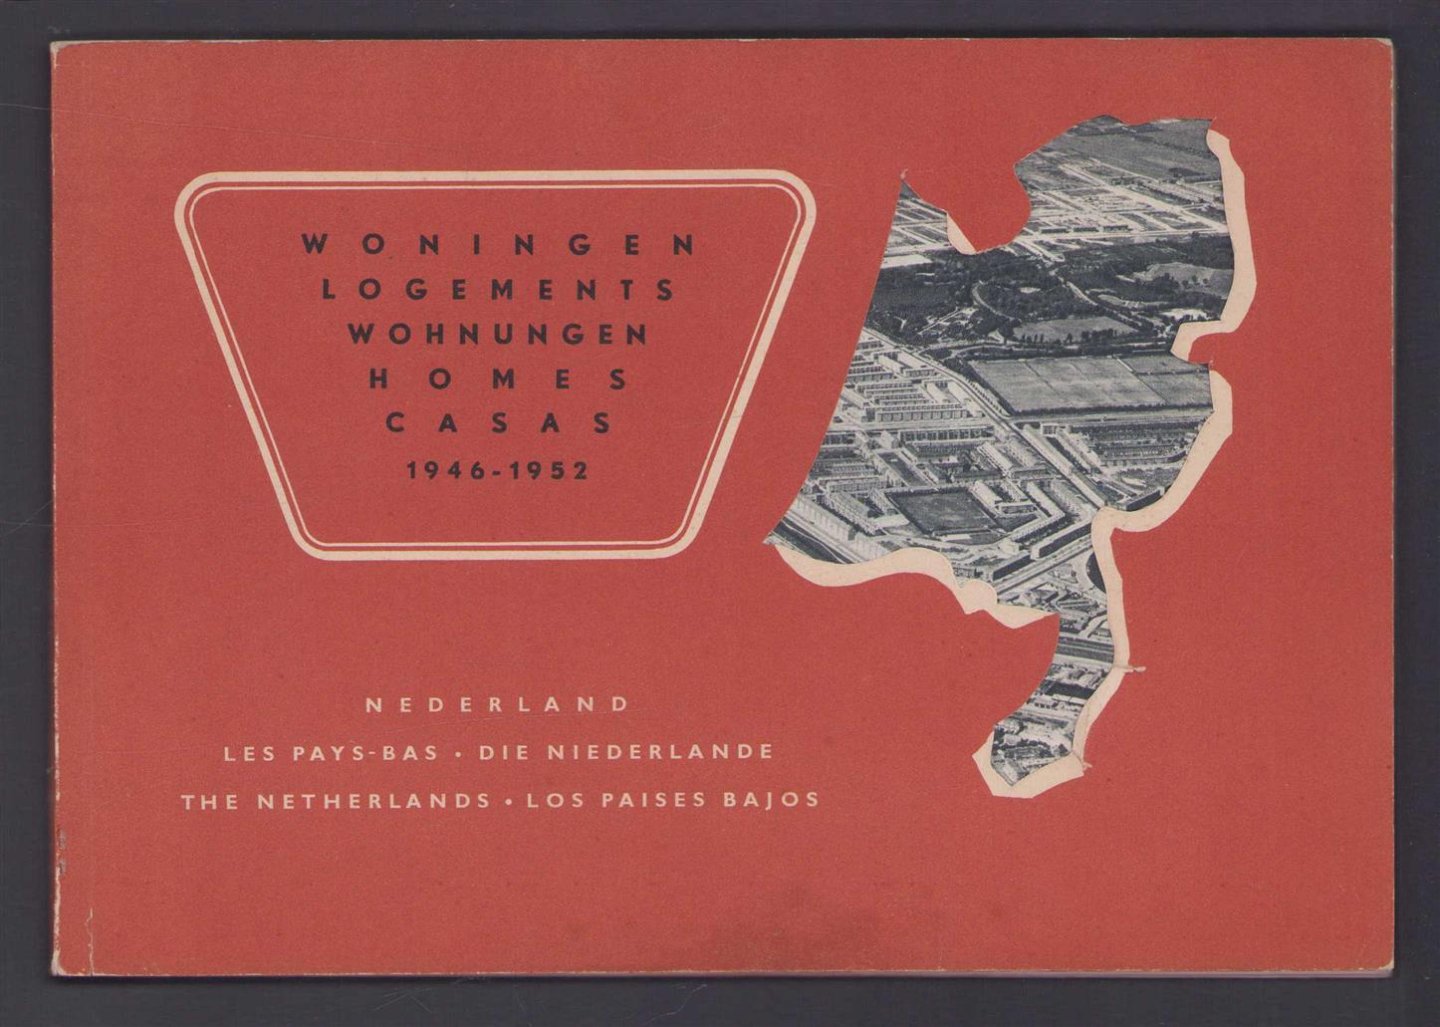 Central Directorate of Reconstruction and Housing, Information Department of the Ministry of Reconstruction and Housing - Woningen, logements, Wohnungen, homes, casas 1946-1952, Nederland, les Pays-Bas, die Niederlande, the Netherlands, los Paises Bajos